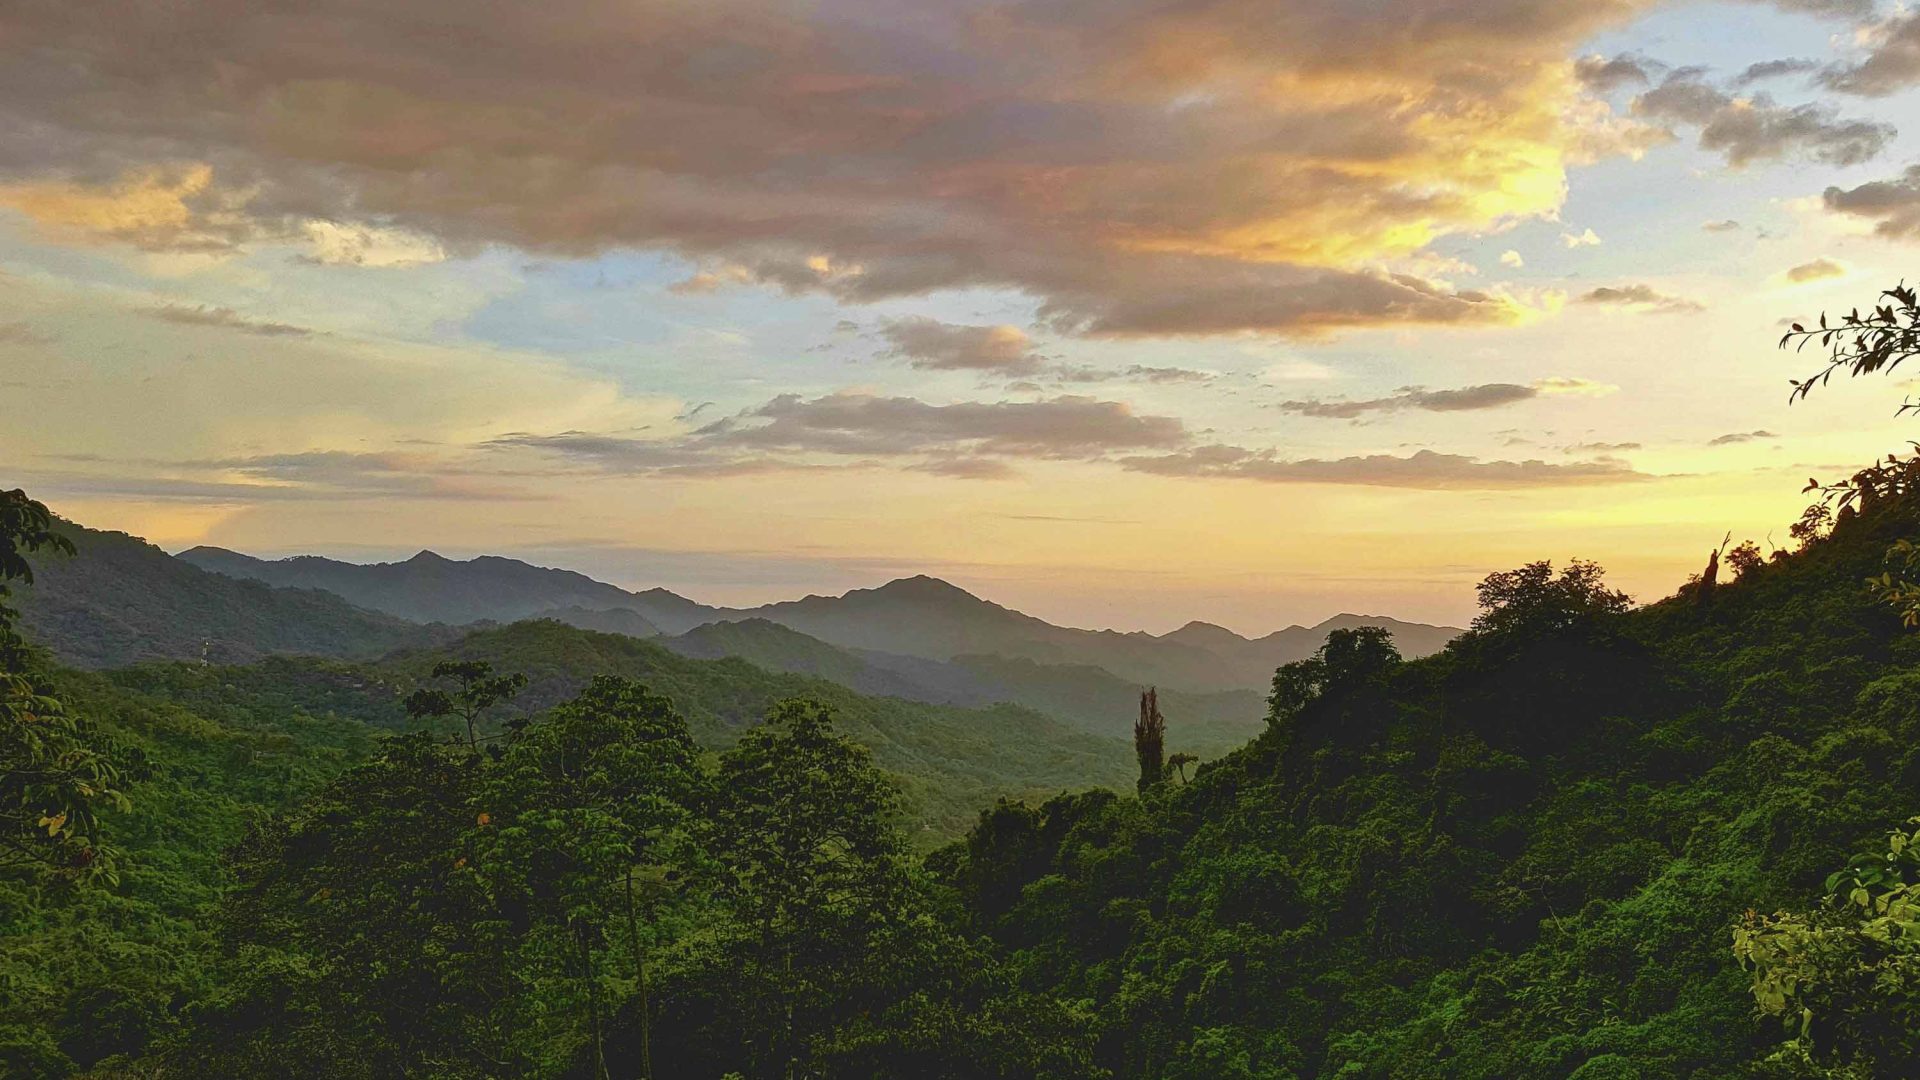 Sunset over the verdant green forests of Minca. Colombia.